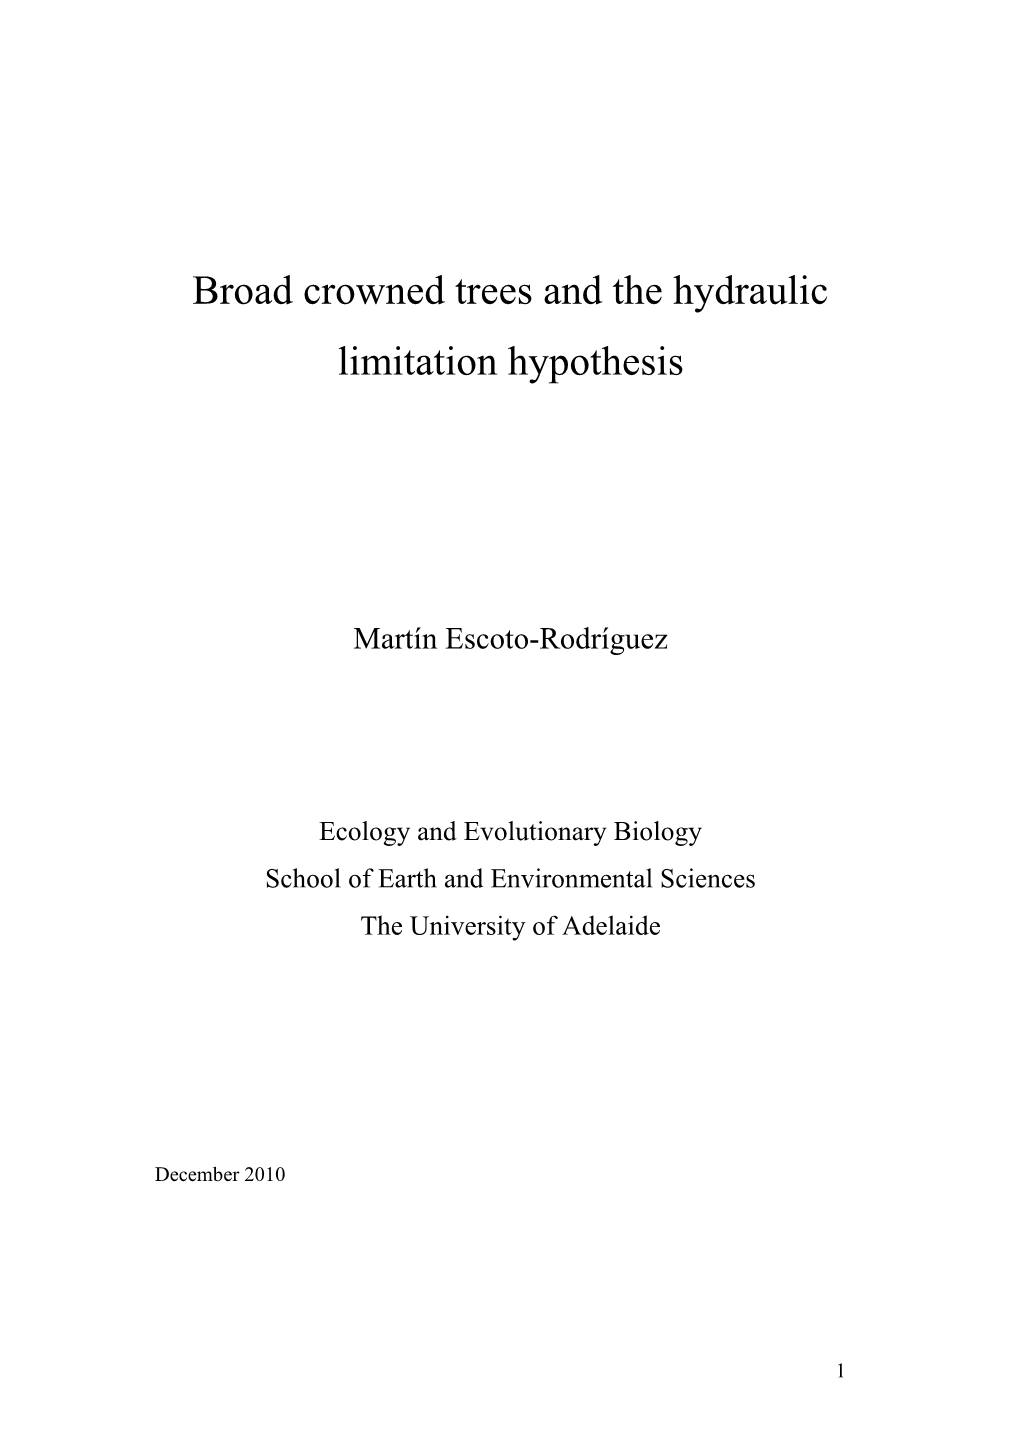 Broad Crown Trees and the Hydraulic Limitation Hypothesis